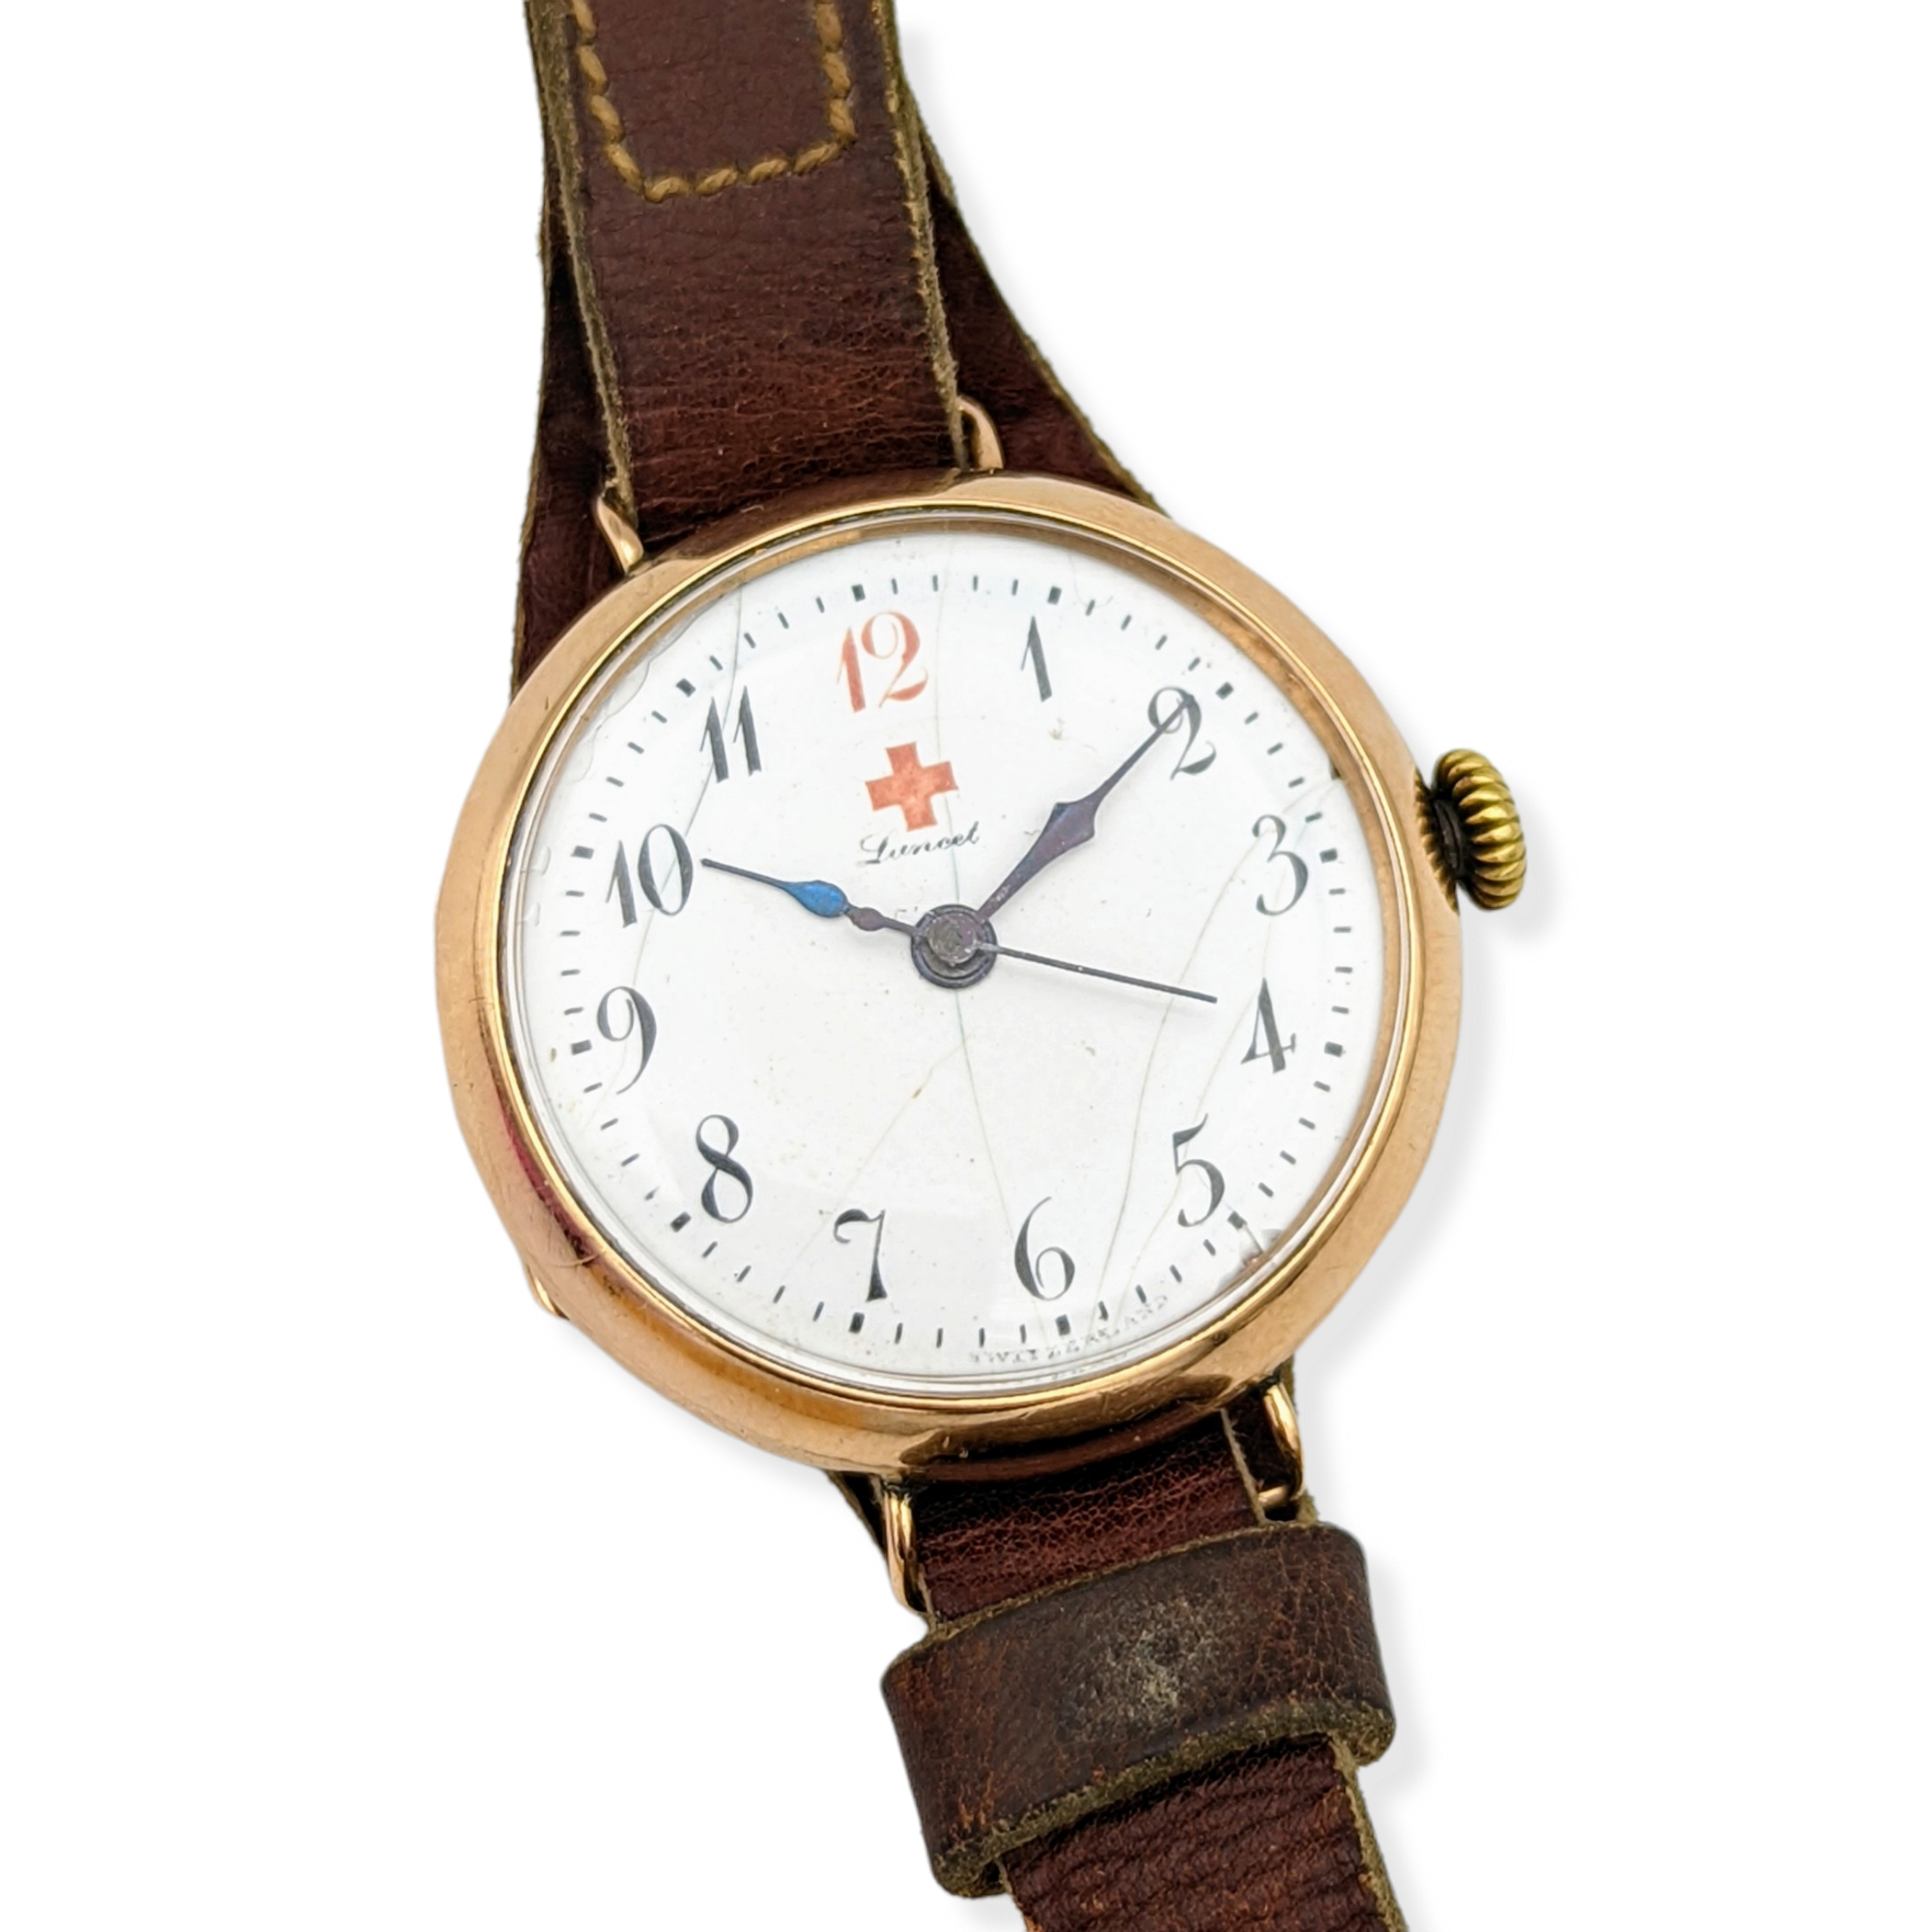 Lancet Red Cross Medical Wristwatch - WWI Trench Watch - REBBERG Movement 7 Jewels